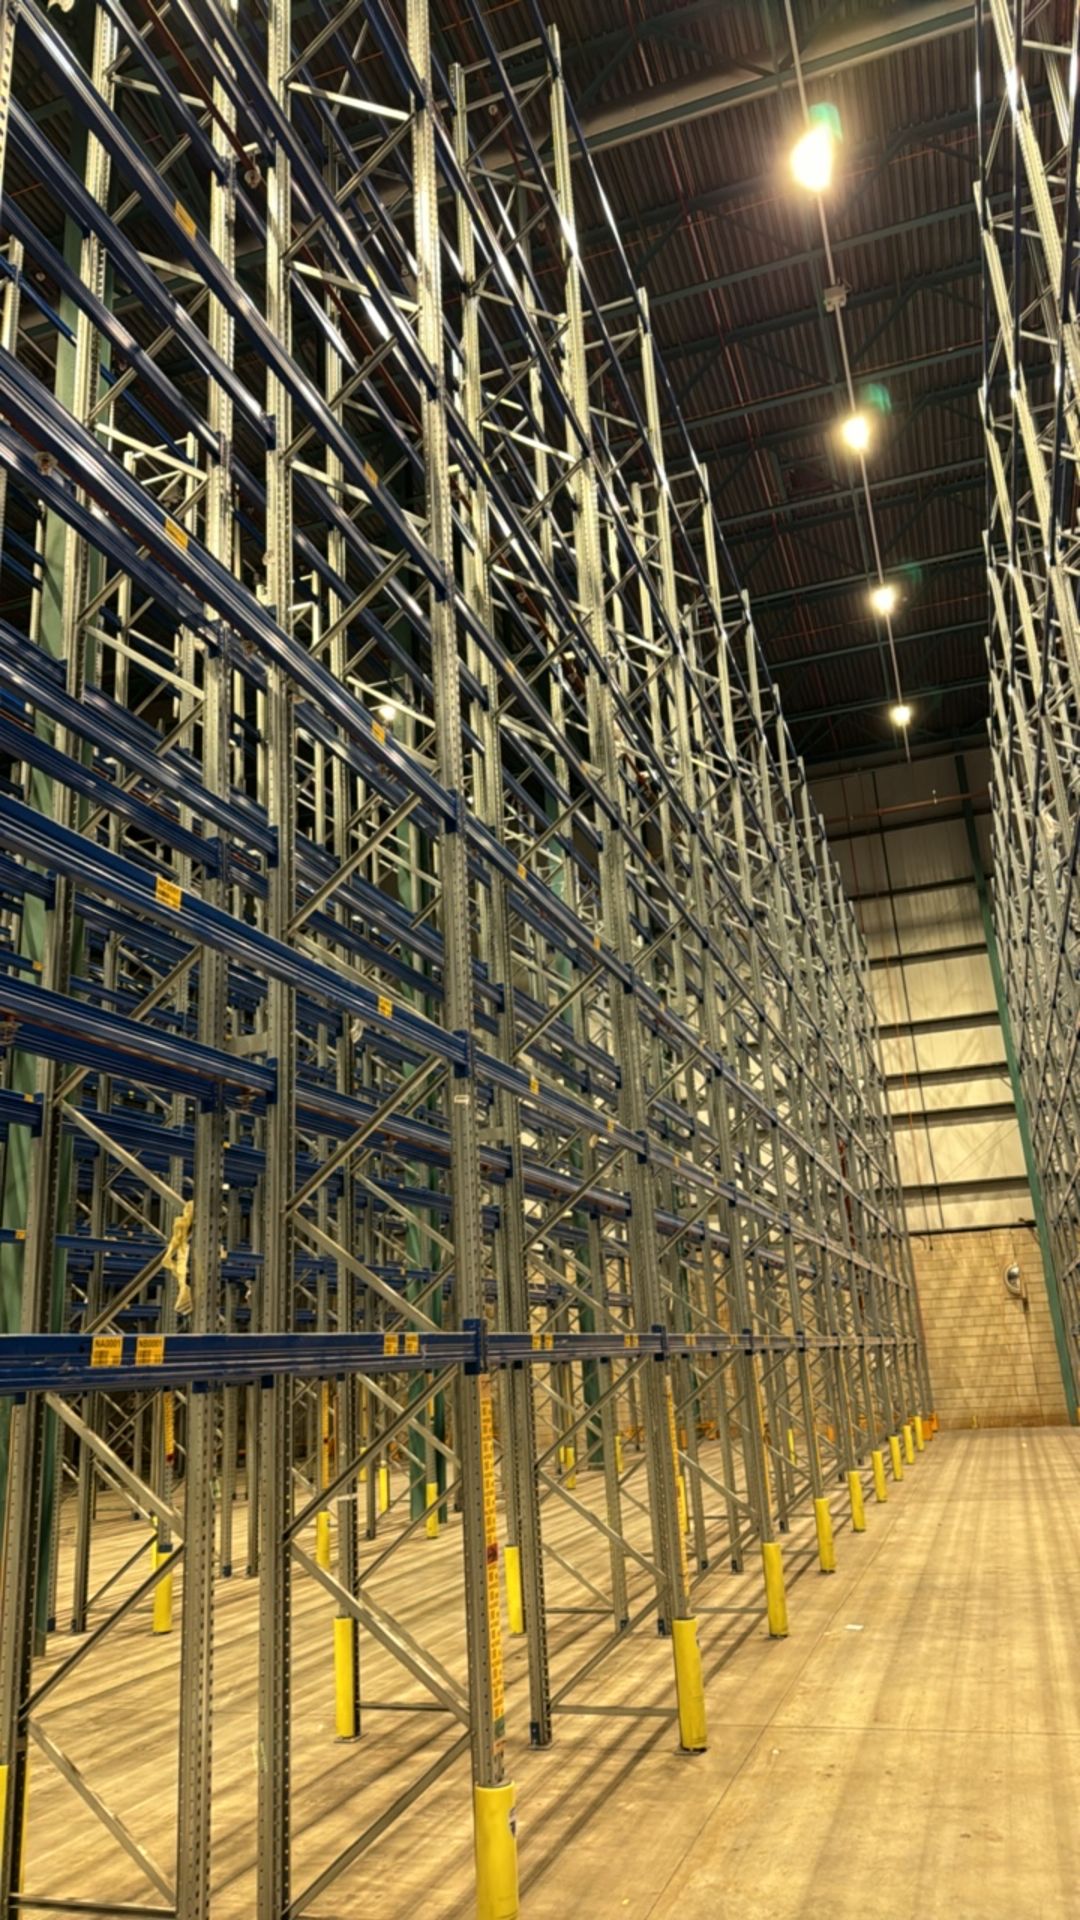 Run Of 22 Bays Of Back To Back Bolt-less Pallet Racking - Image 8 of 10